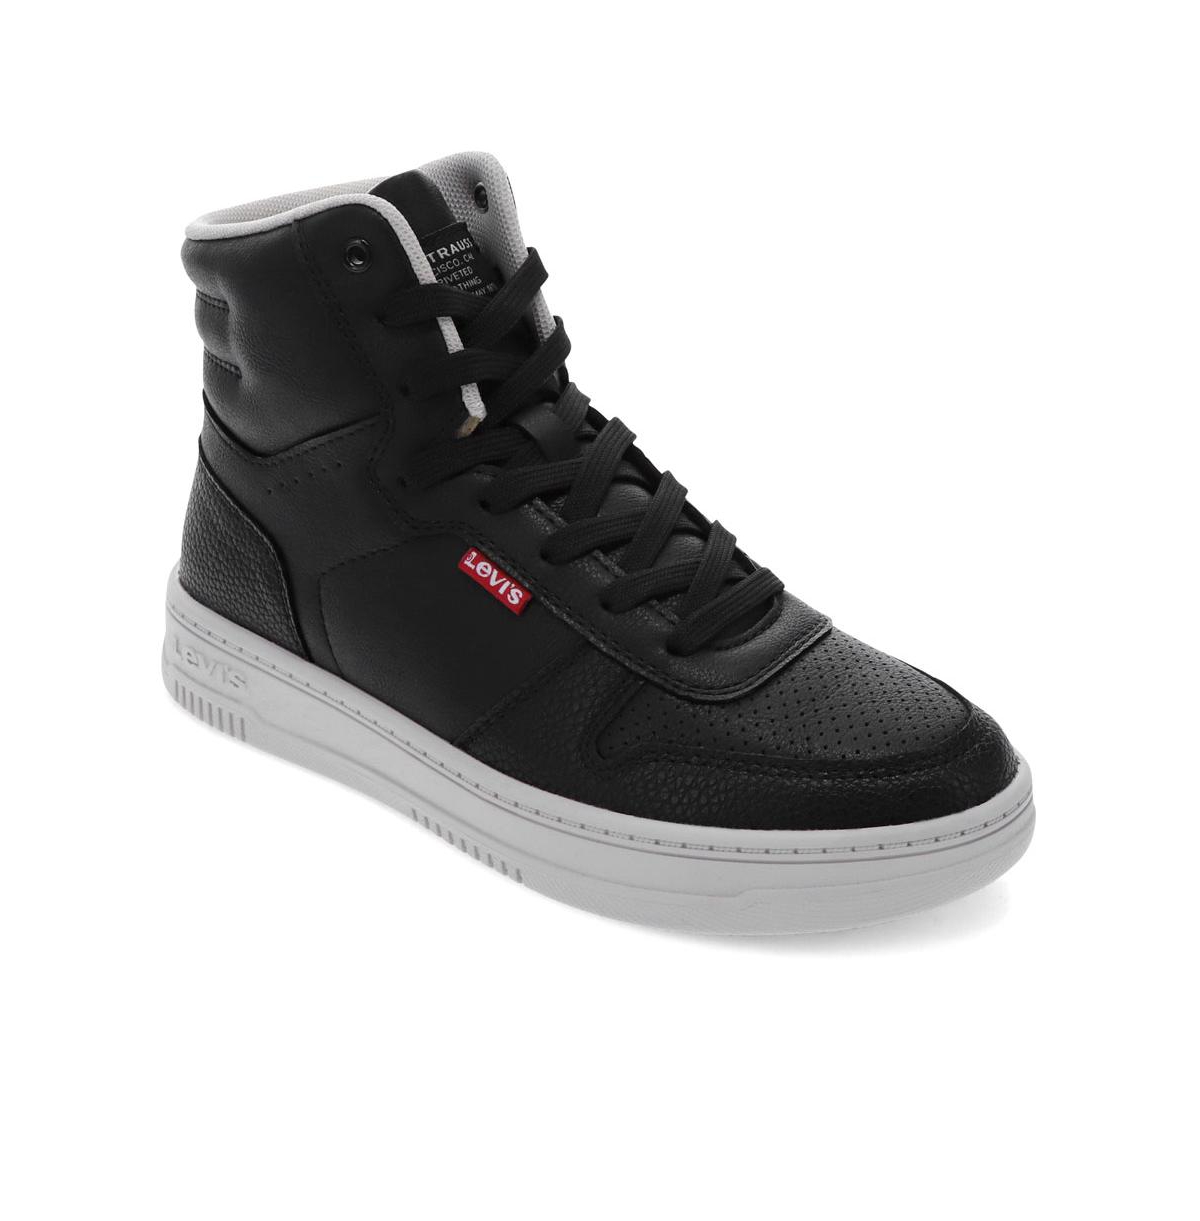 Levi's Women's Drive Hi Synthetic Leather Casual High-top Sneaker Shoe In Black